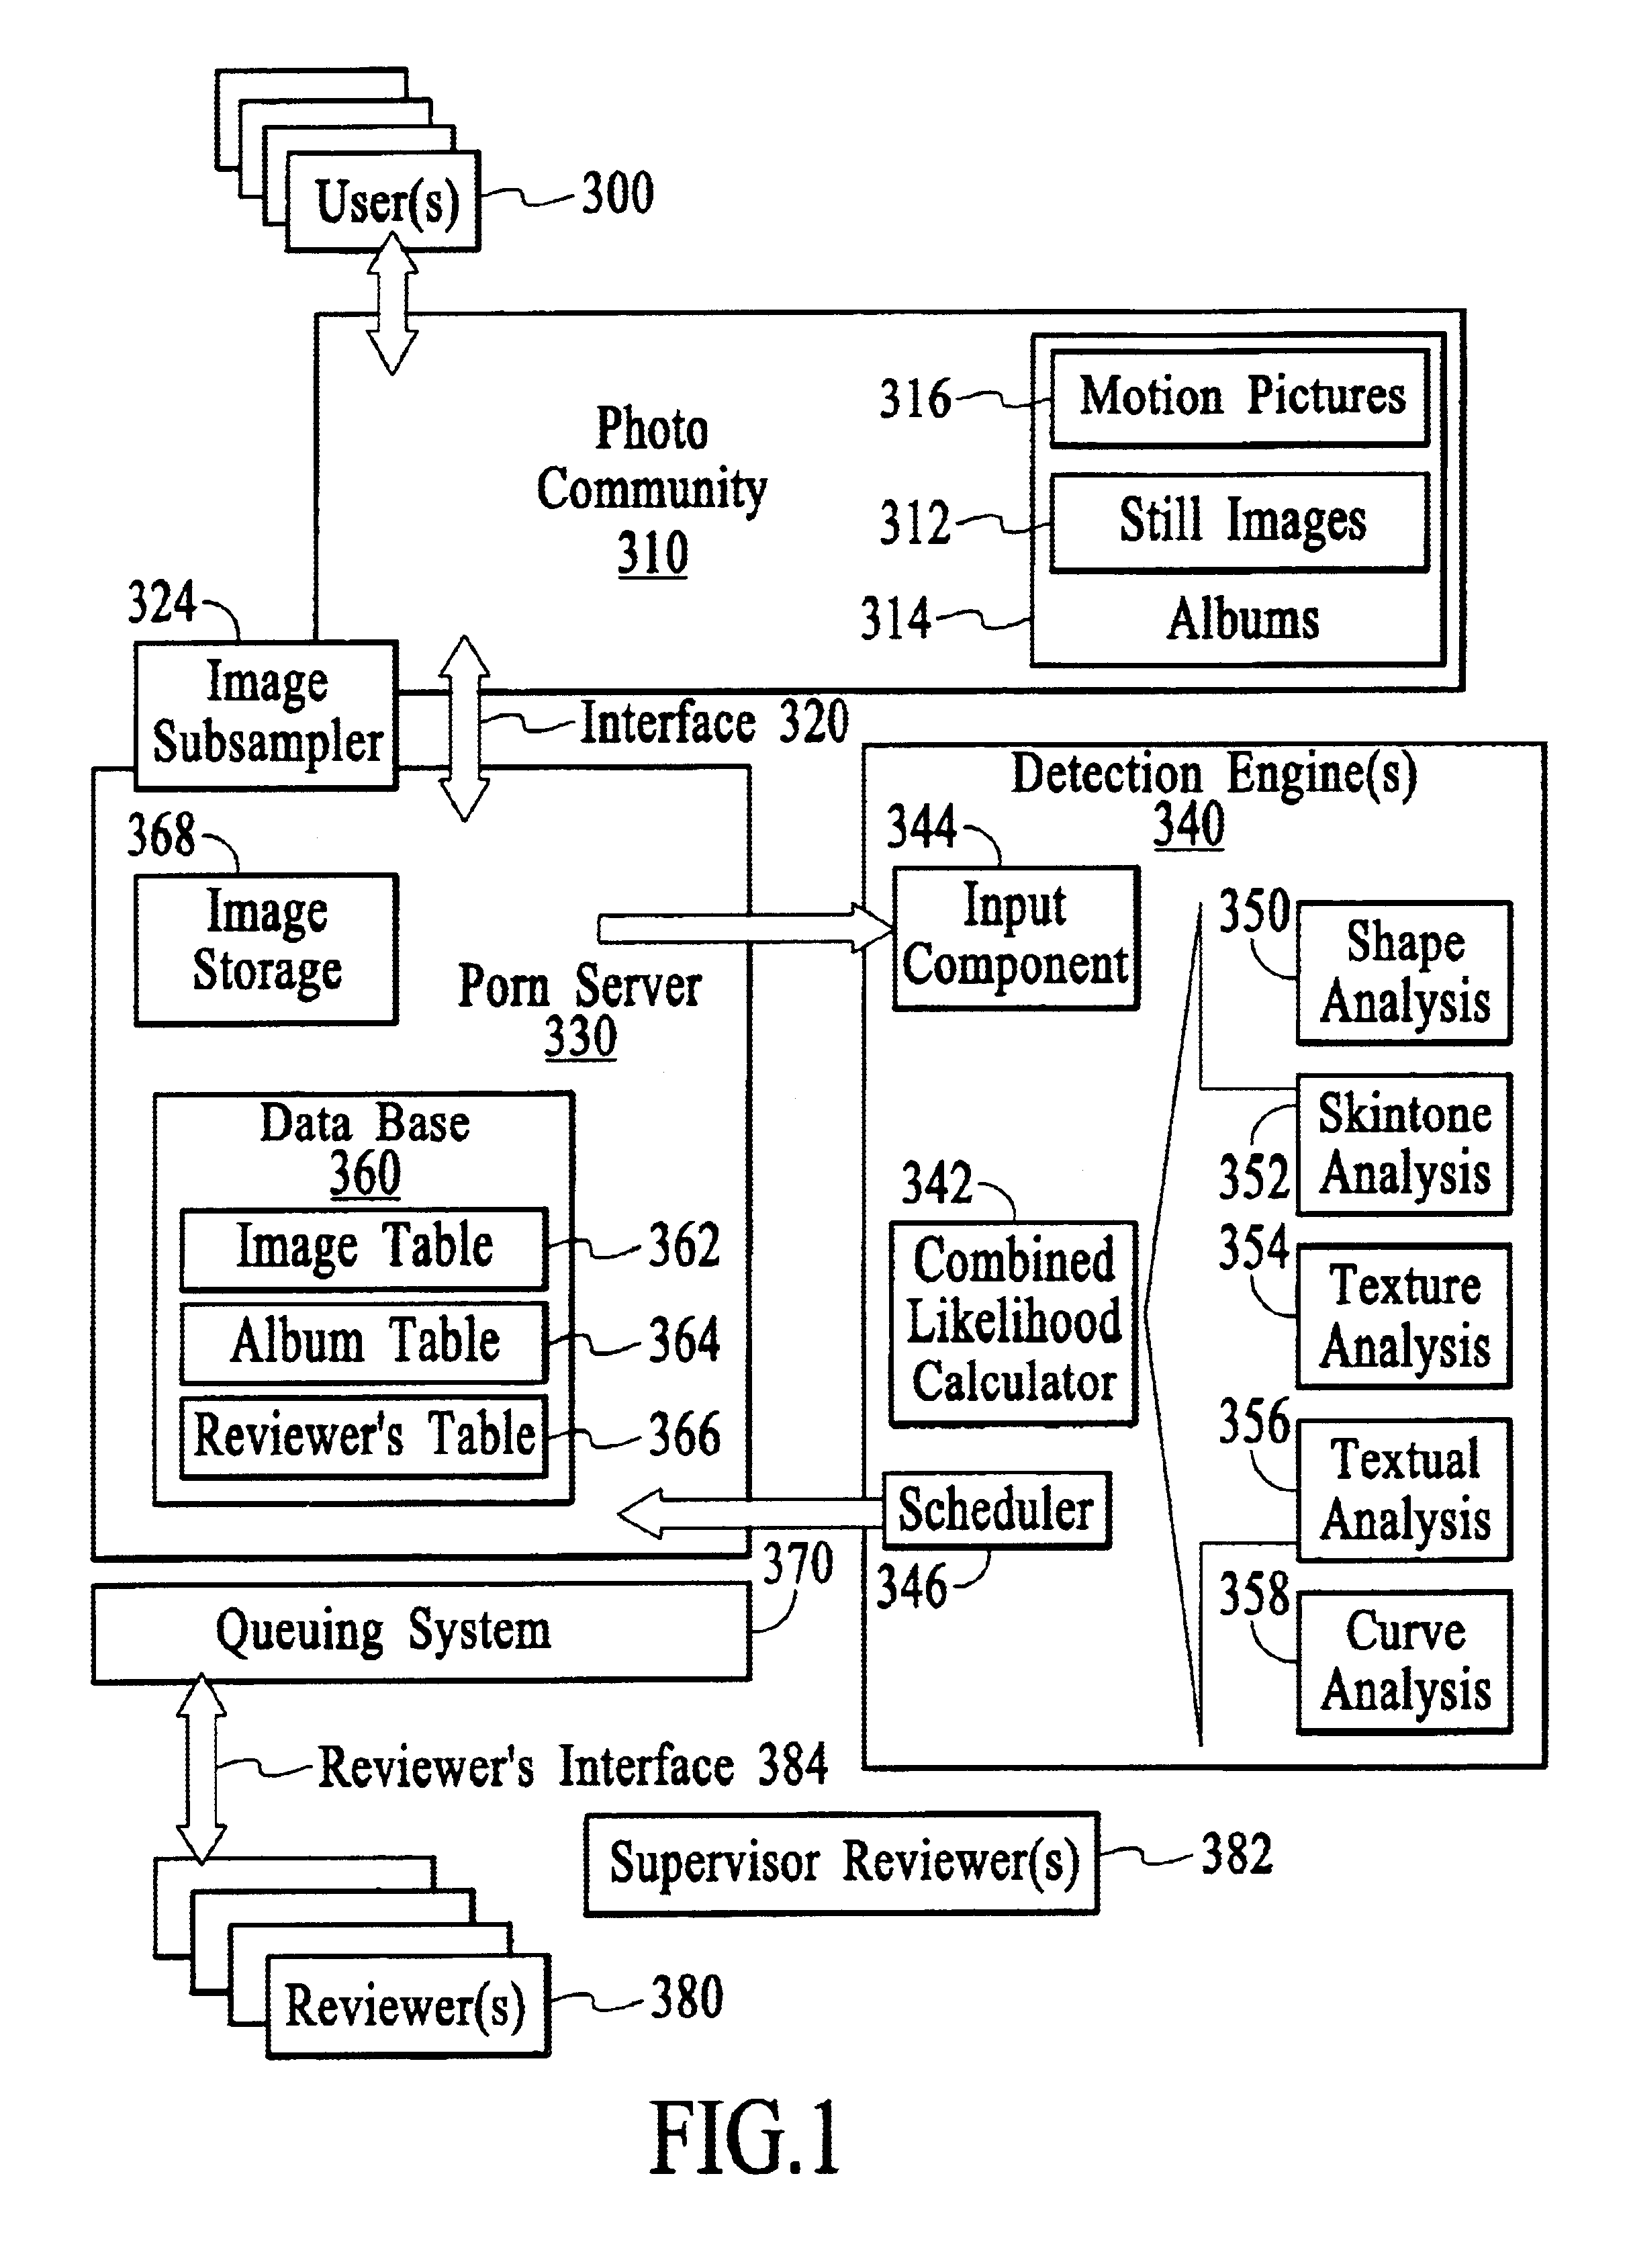 Workflow system for detection and classification of images suspected as pornographic